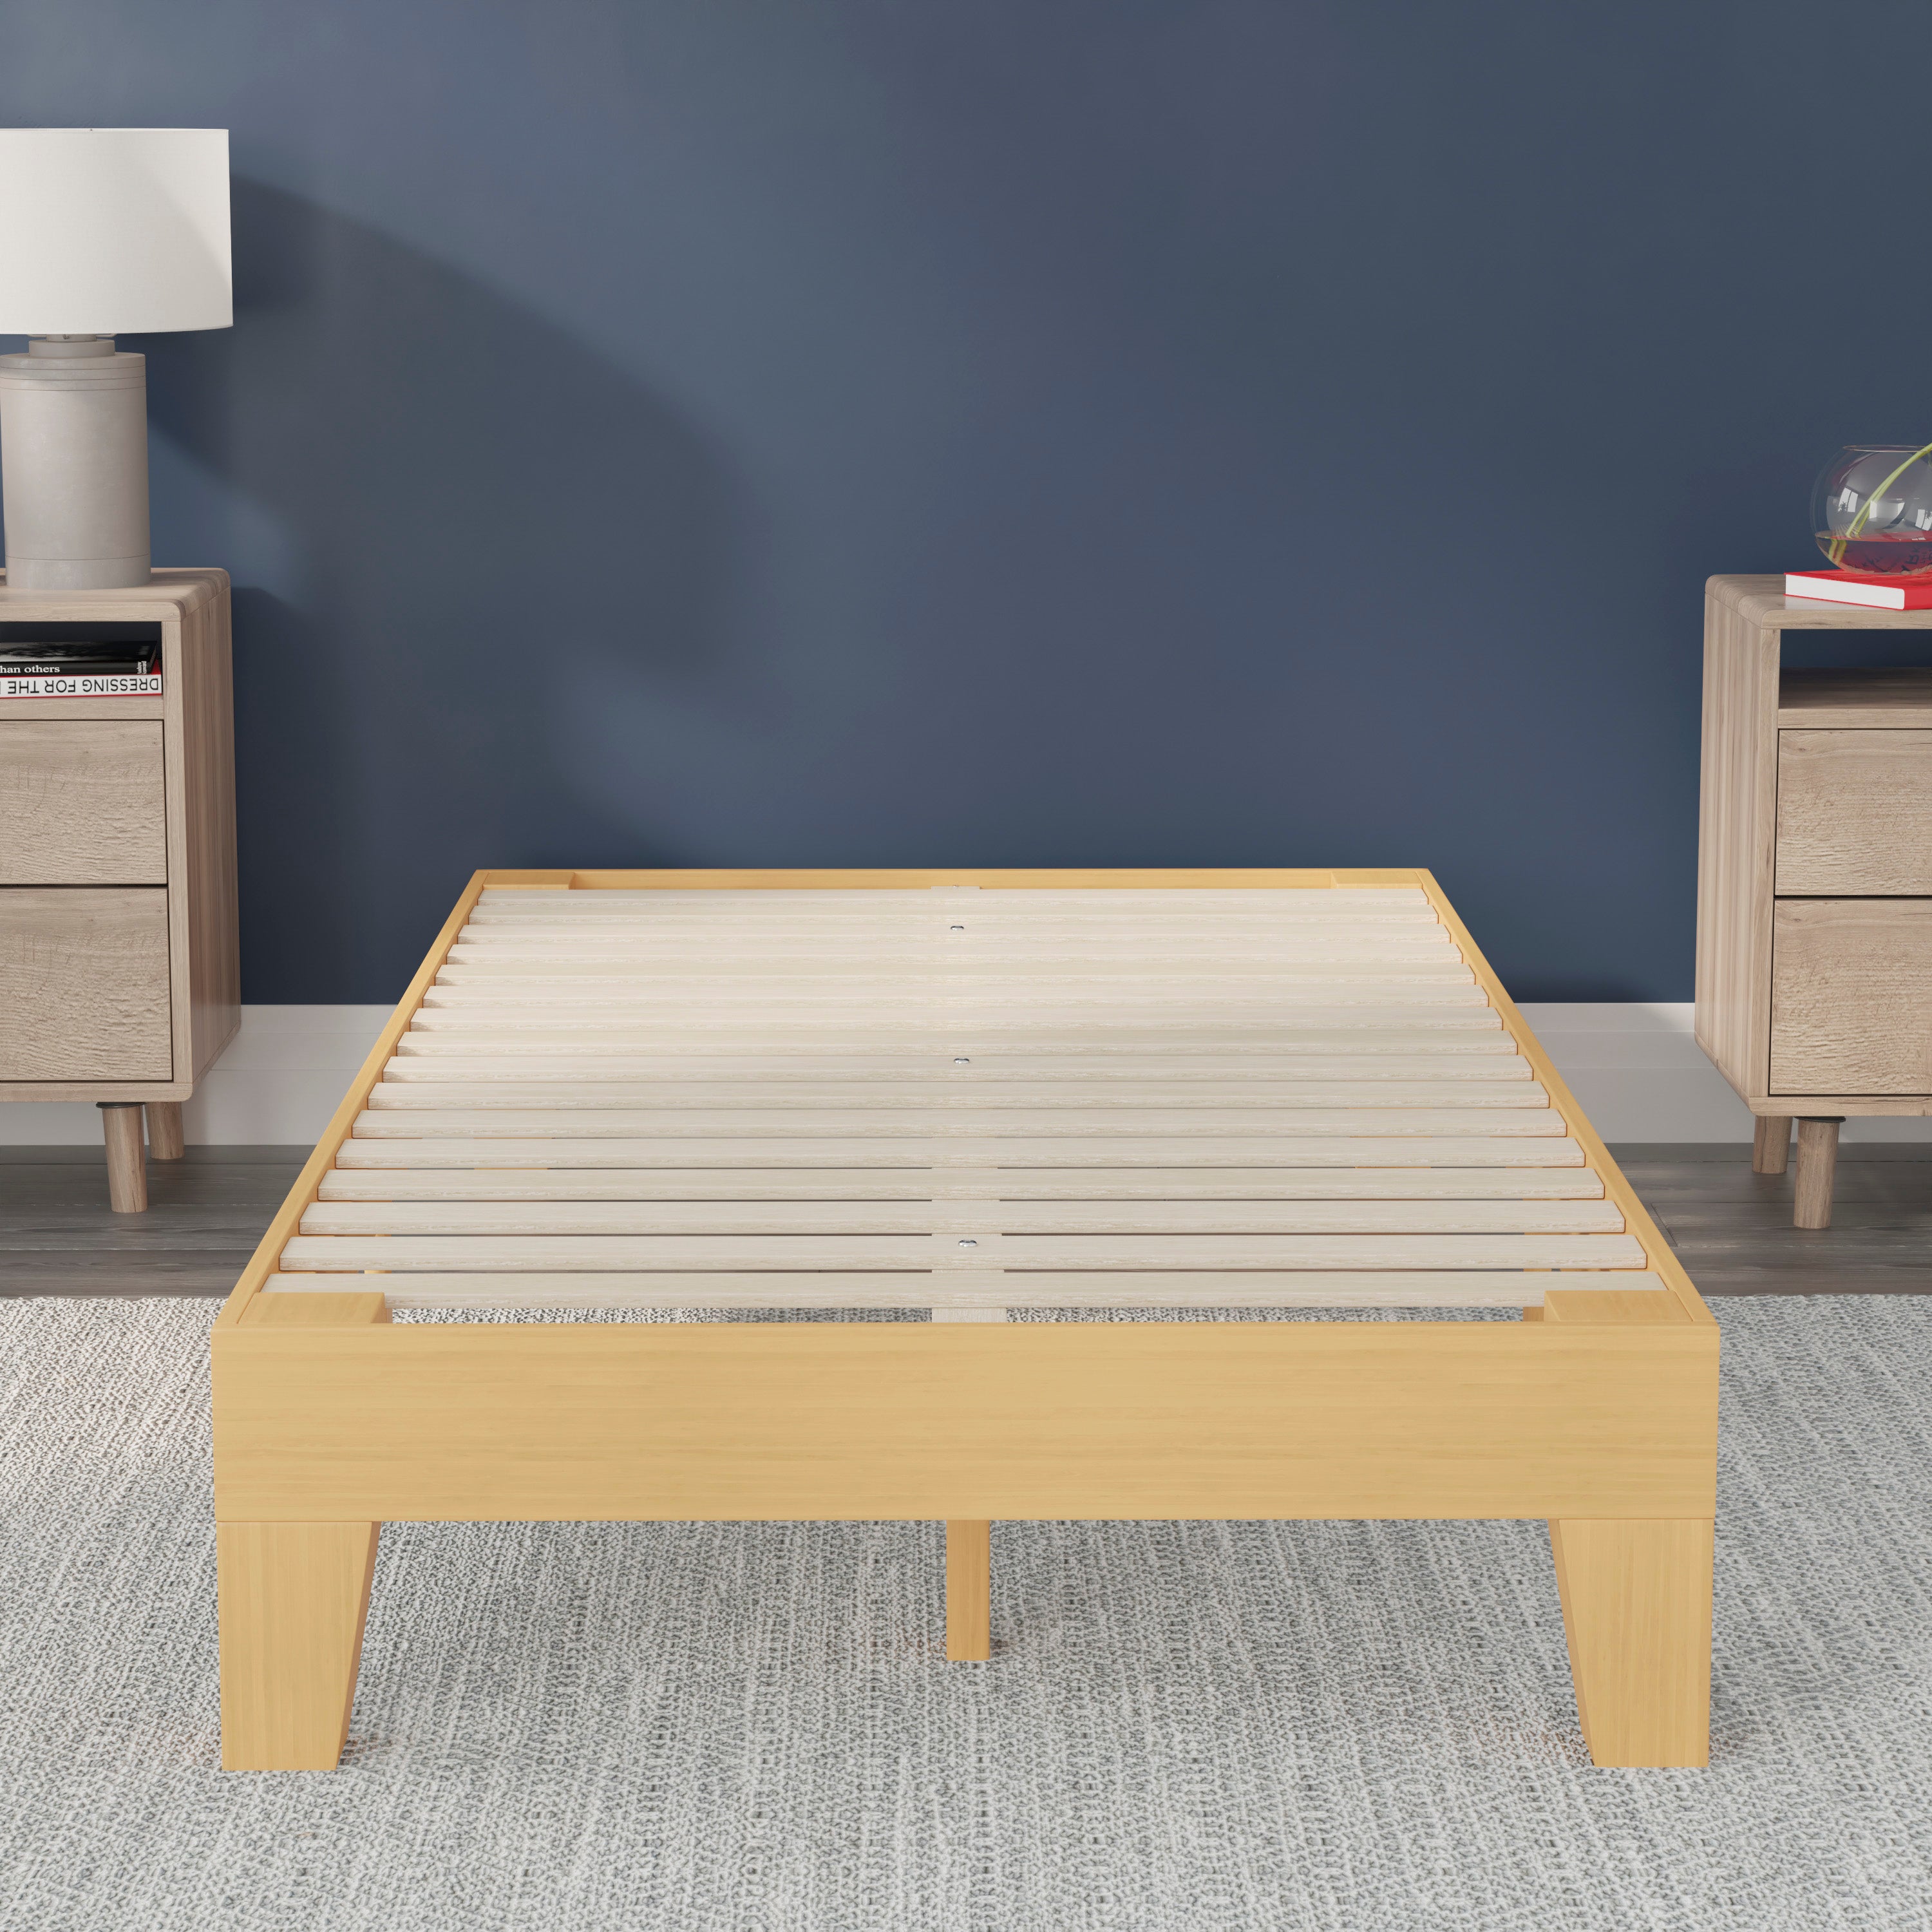 Evelyn Wood Platform Bed with Wooden Support Slats, No Box Spring Required-Bed Frame-Flash Furniture-Wall2Wall Furnishings